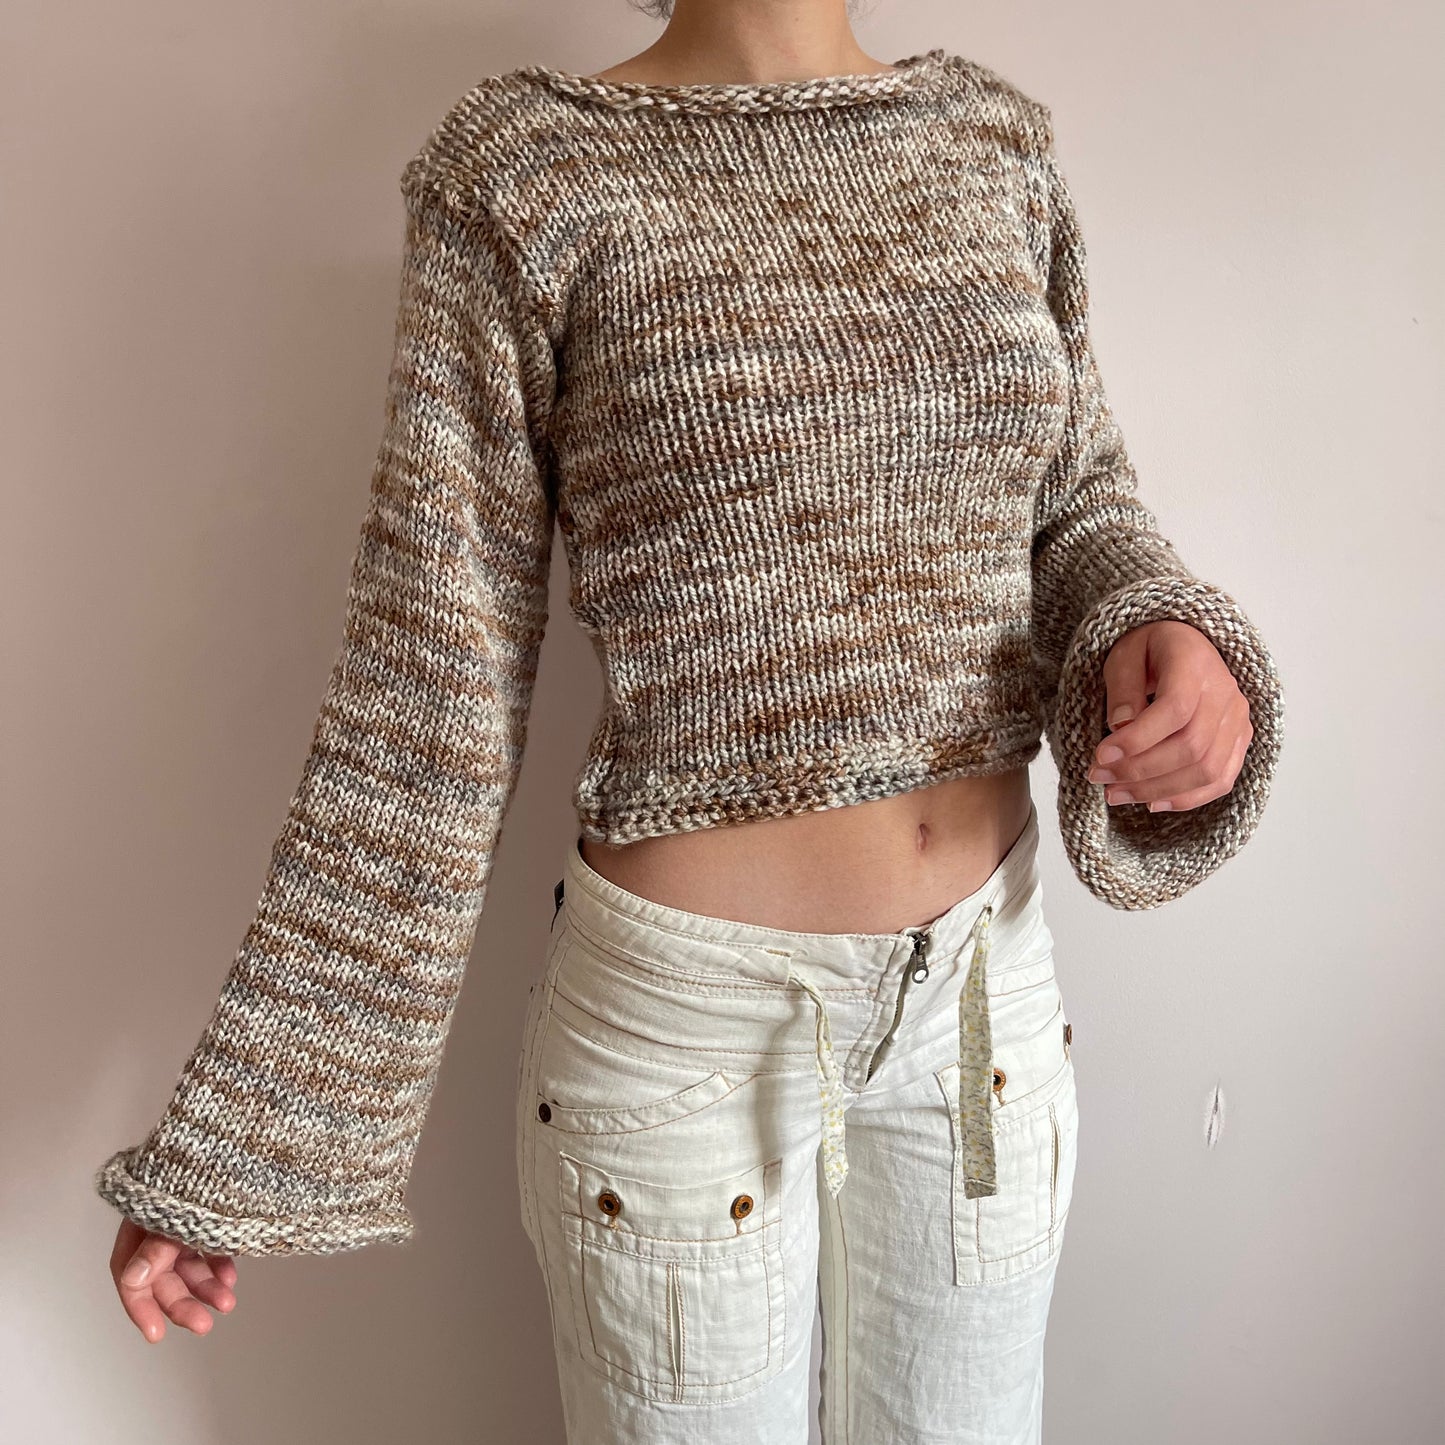 Handmade multicoloured beige, cream and brown knitted sweater